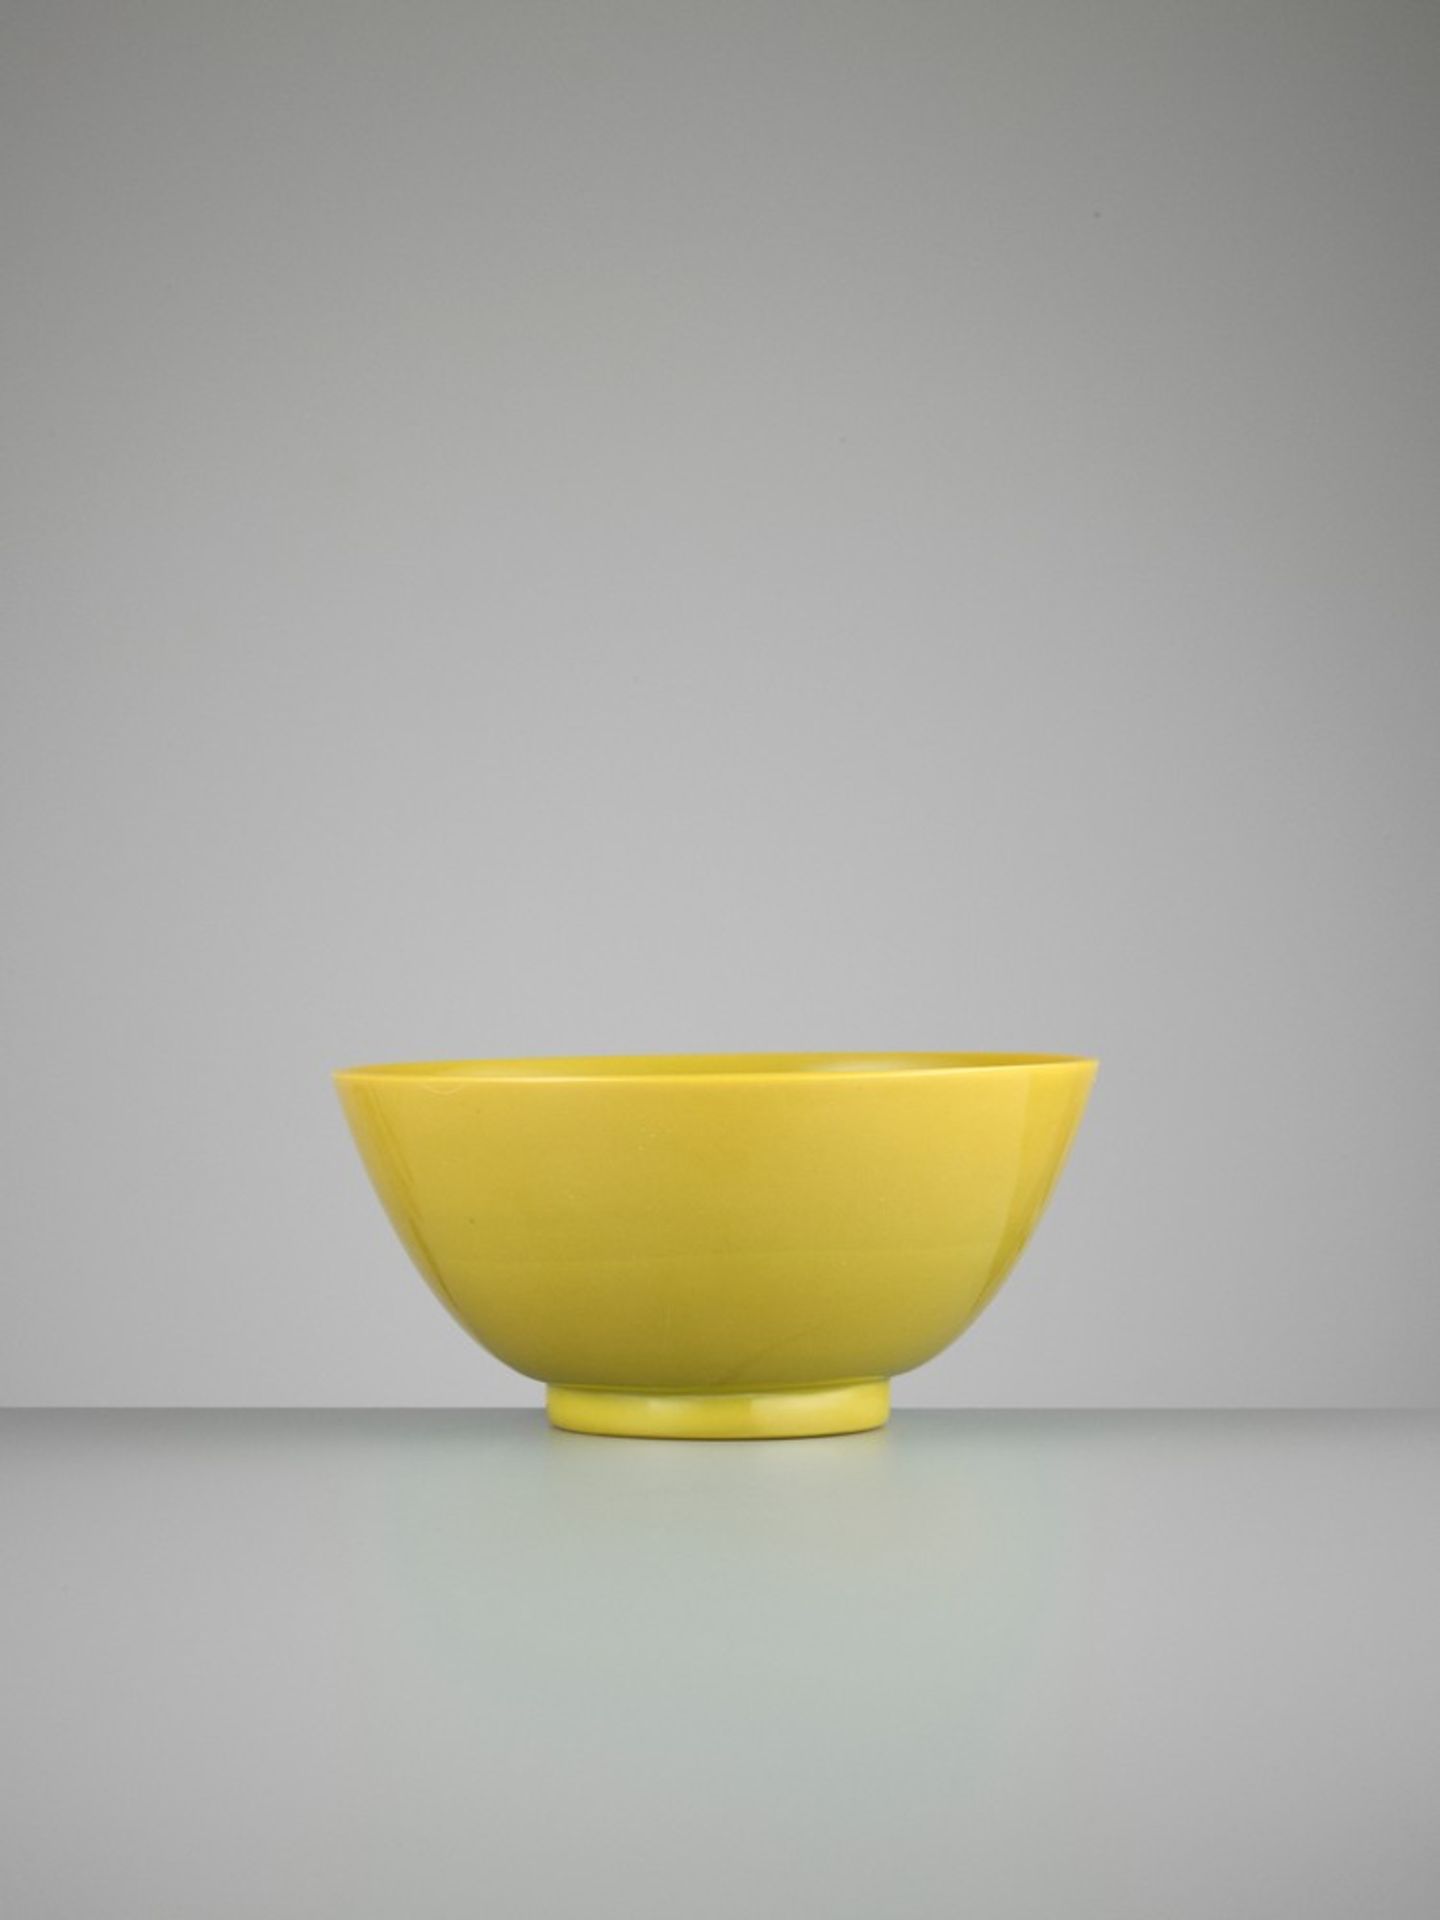 A MUSTARD-YELLOW GLASS BOWL, PROBABLY IMPERIAL, QING DYNASTY - Image 8 of 10